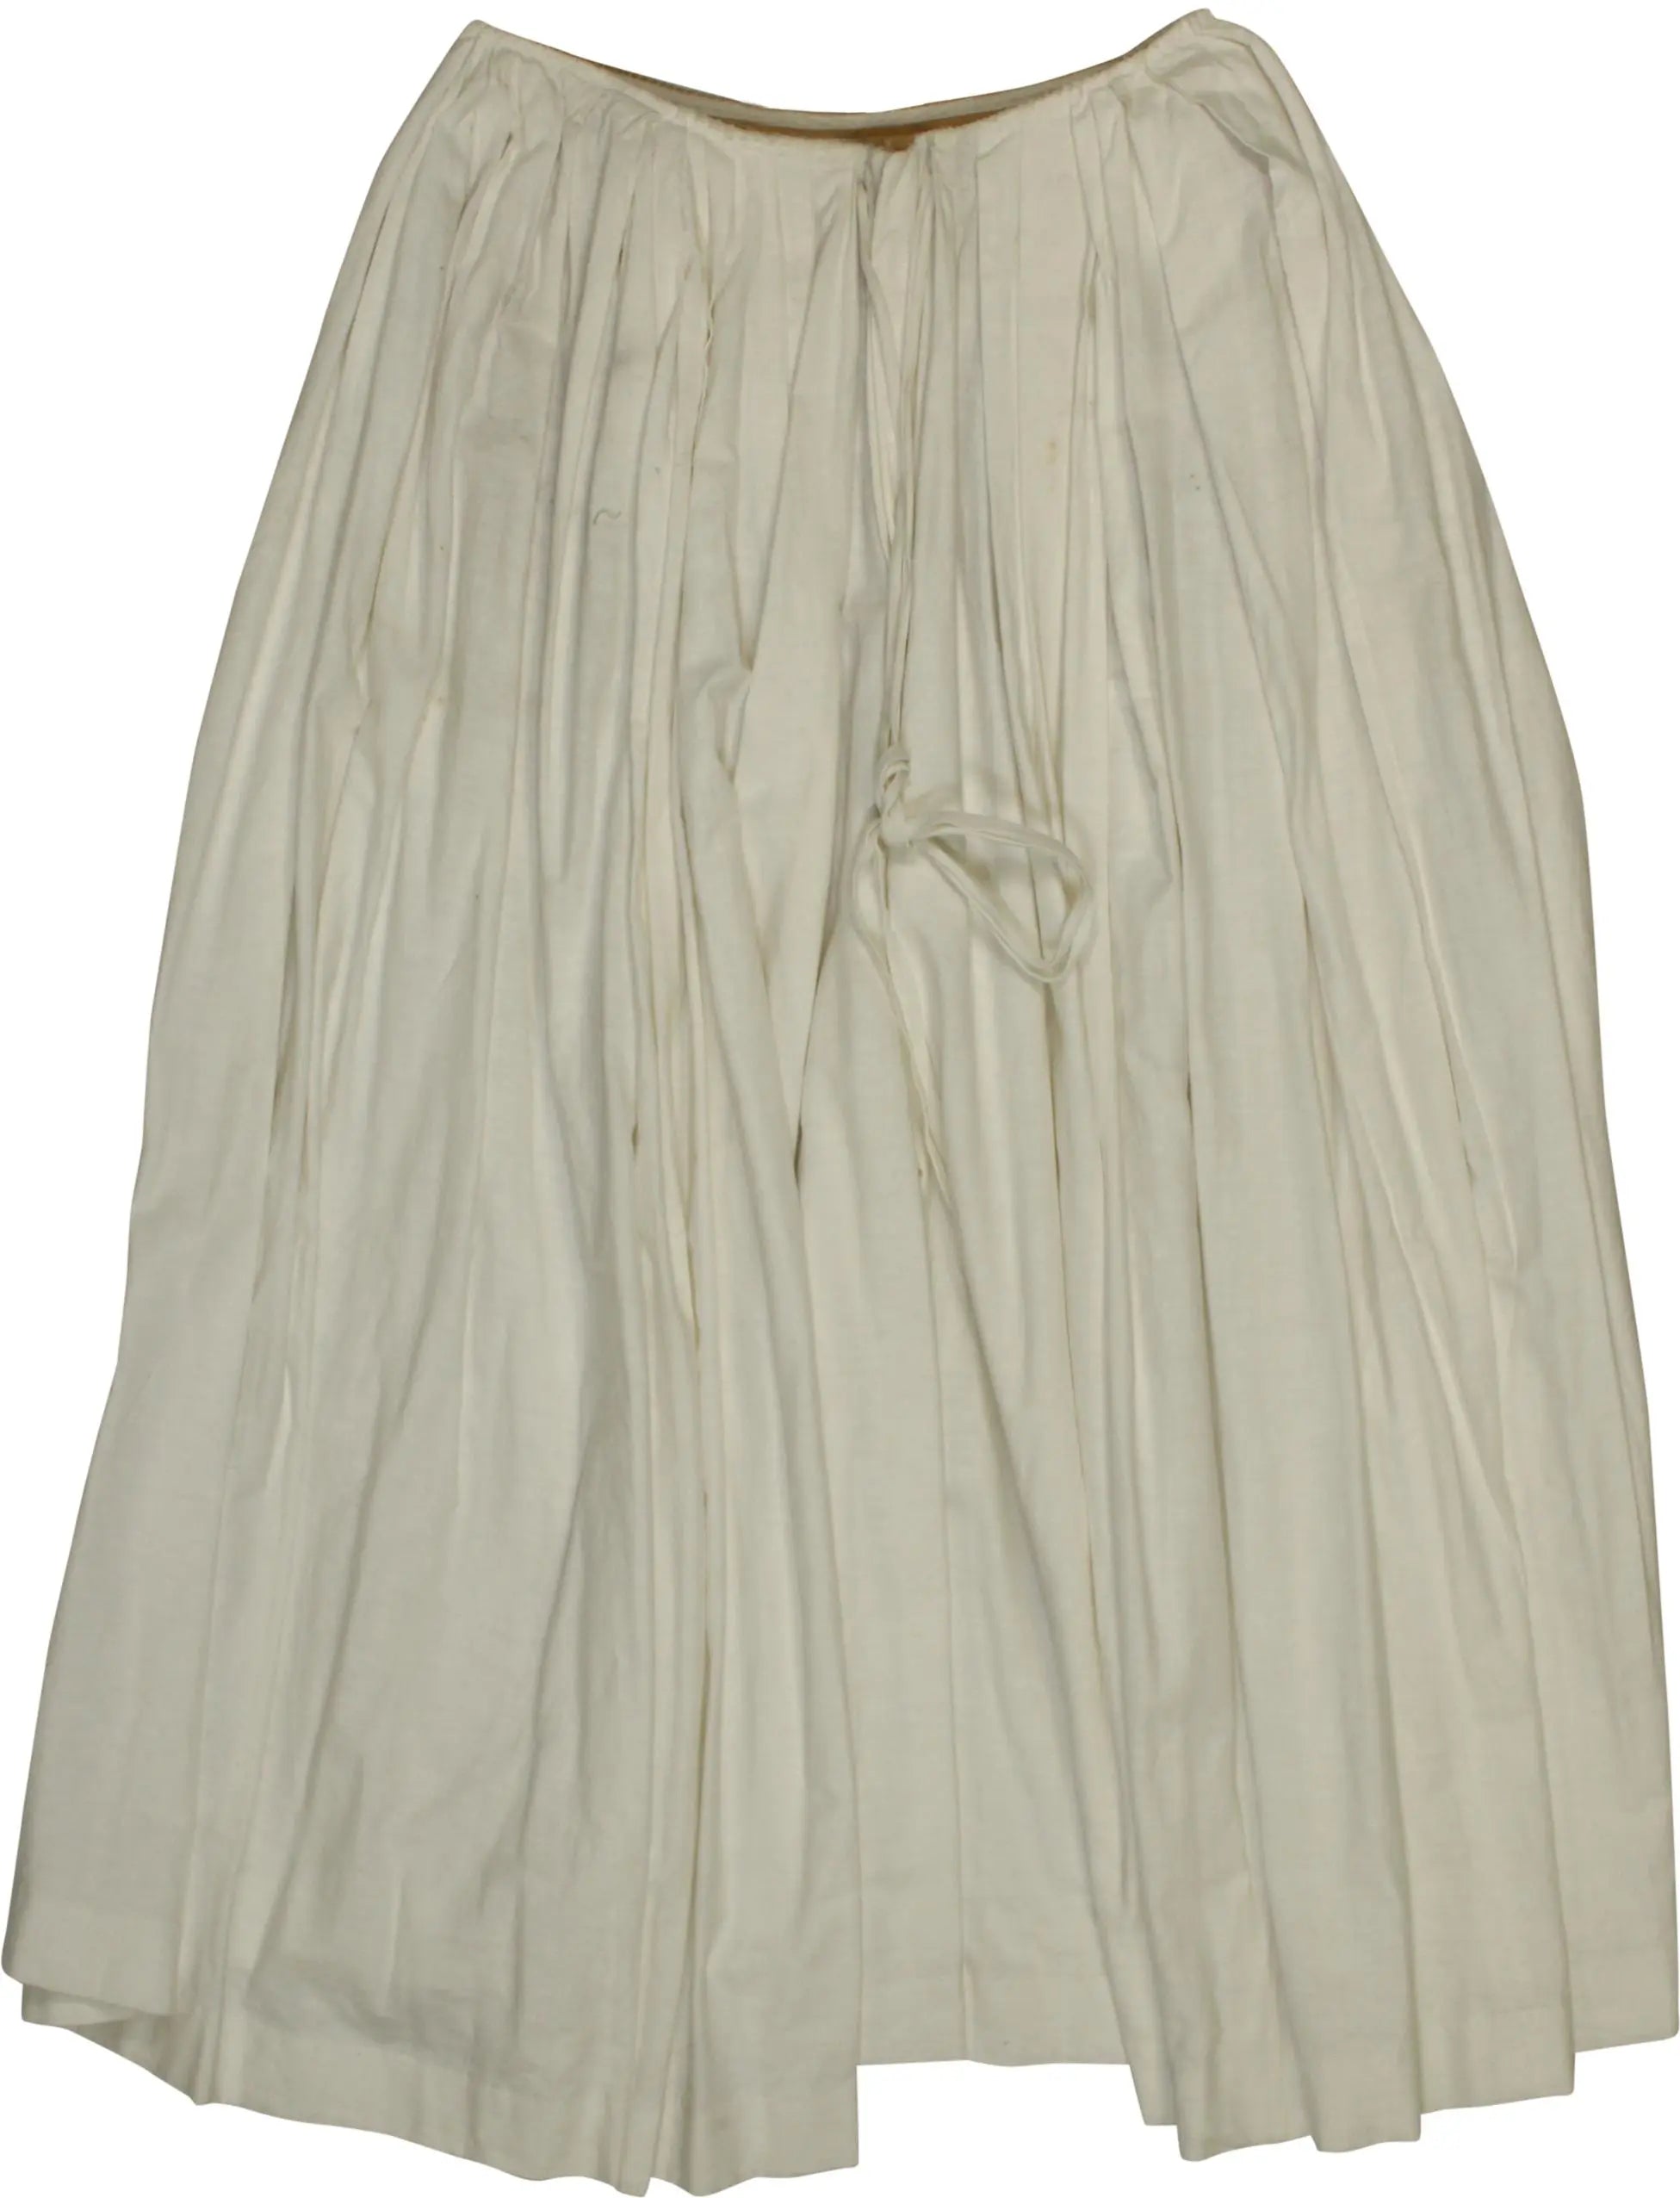 Handmade - Handmade Slip Skirt with Corset- ThriftTale.com - Vintage and second handclothing